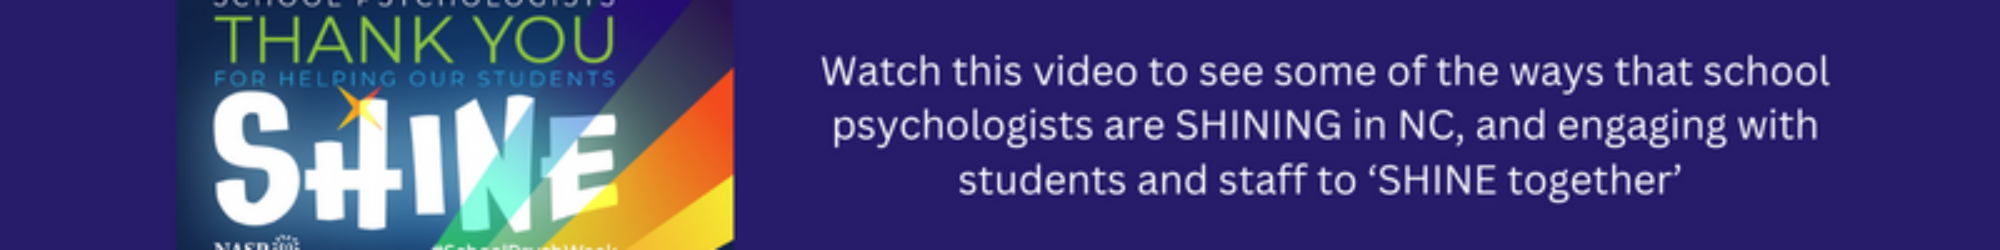 School Psychologists Thank You for helping our Students SHINE. #SchoolPsychWeek. Watch this video to see some of the ways that school psychologists are SHINING in NC, and engaging with students and staff to SHINE together.